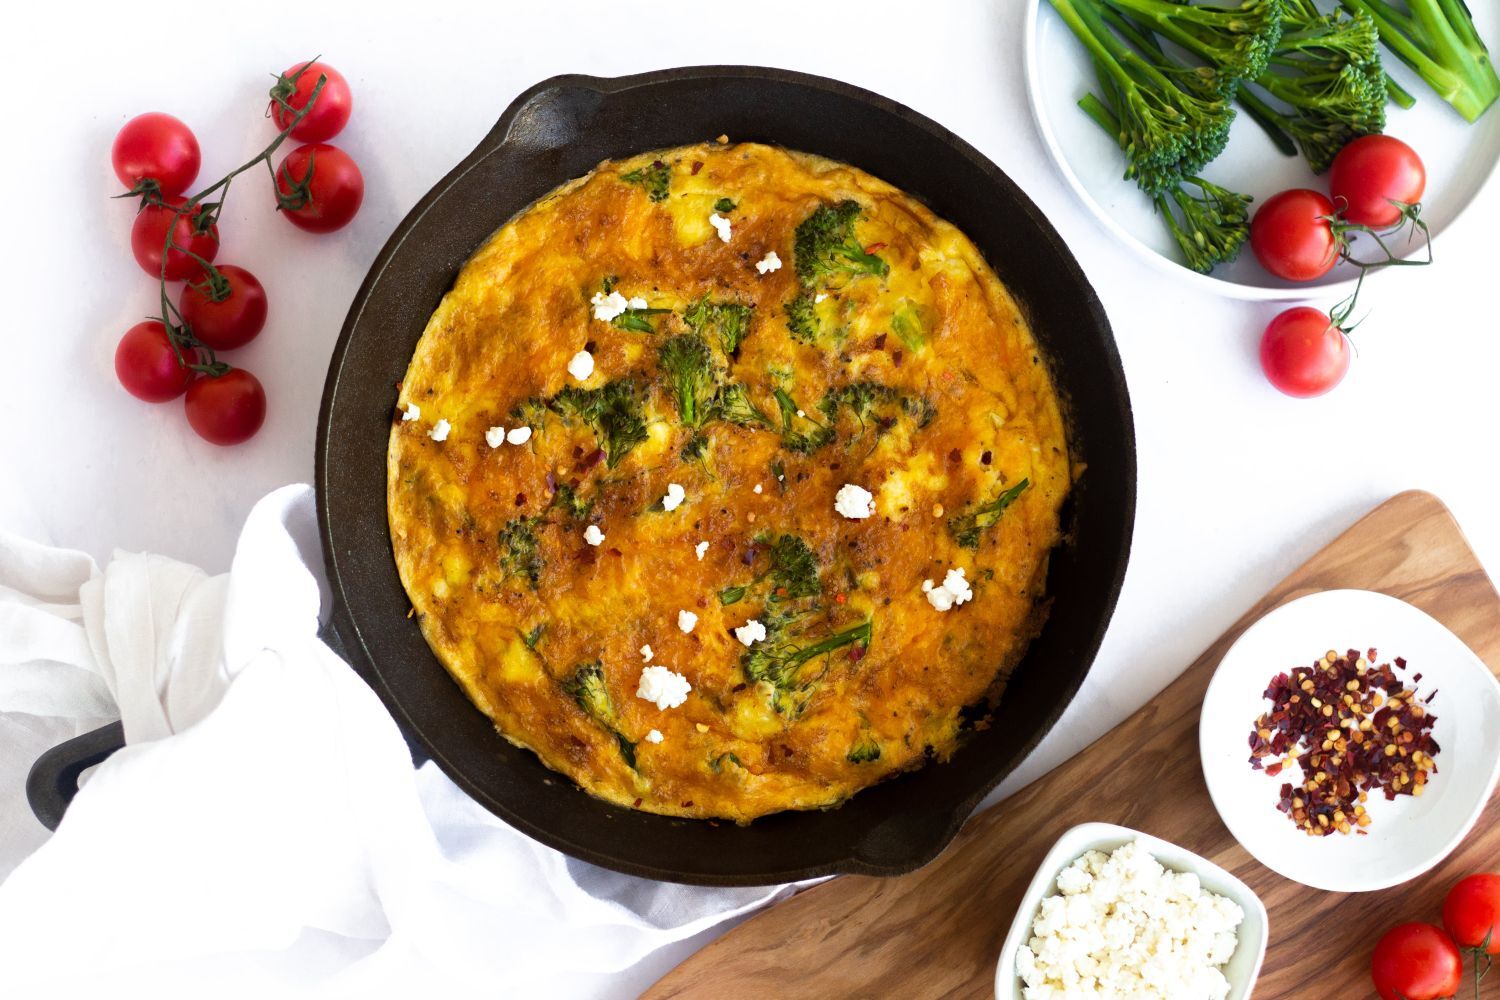 Broccoli and cheese frittata cooked in a skillet with eggs, broccoli, ricotta cheese, and tomatoes.